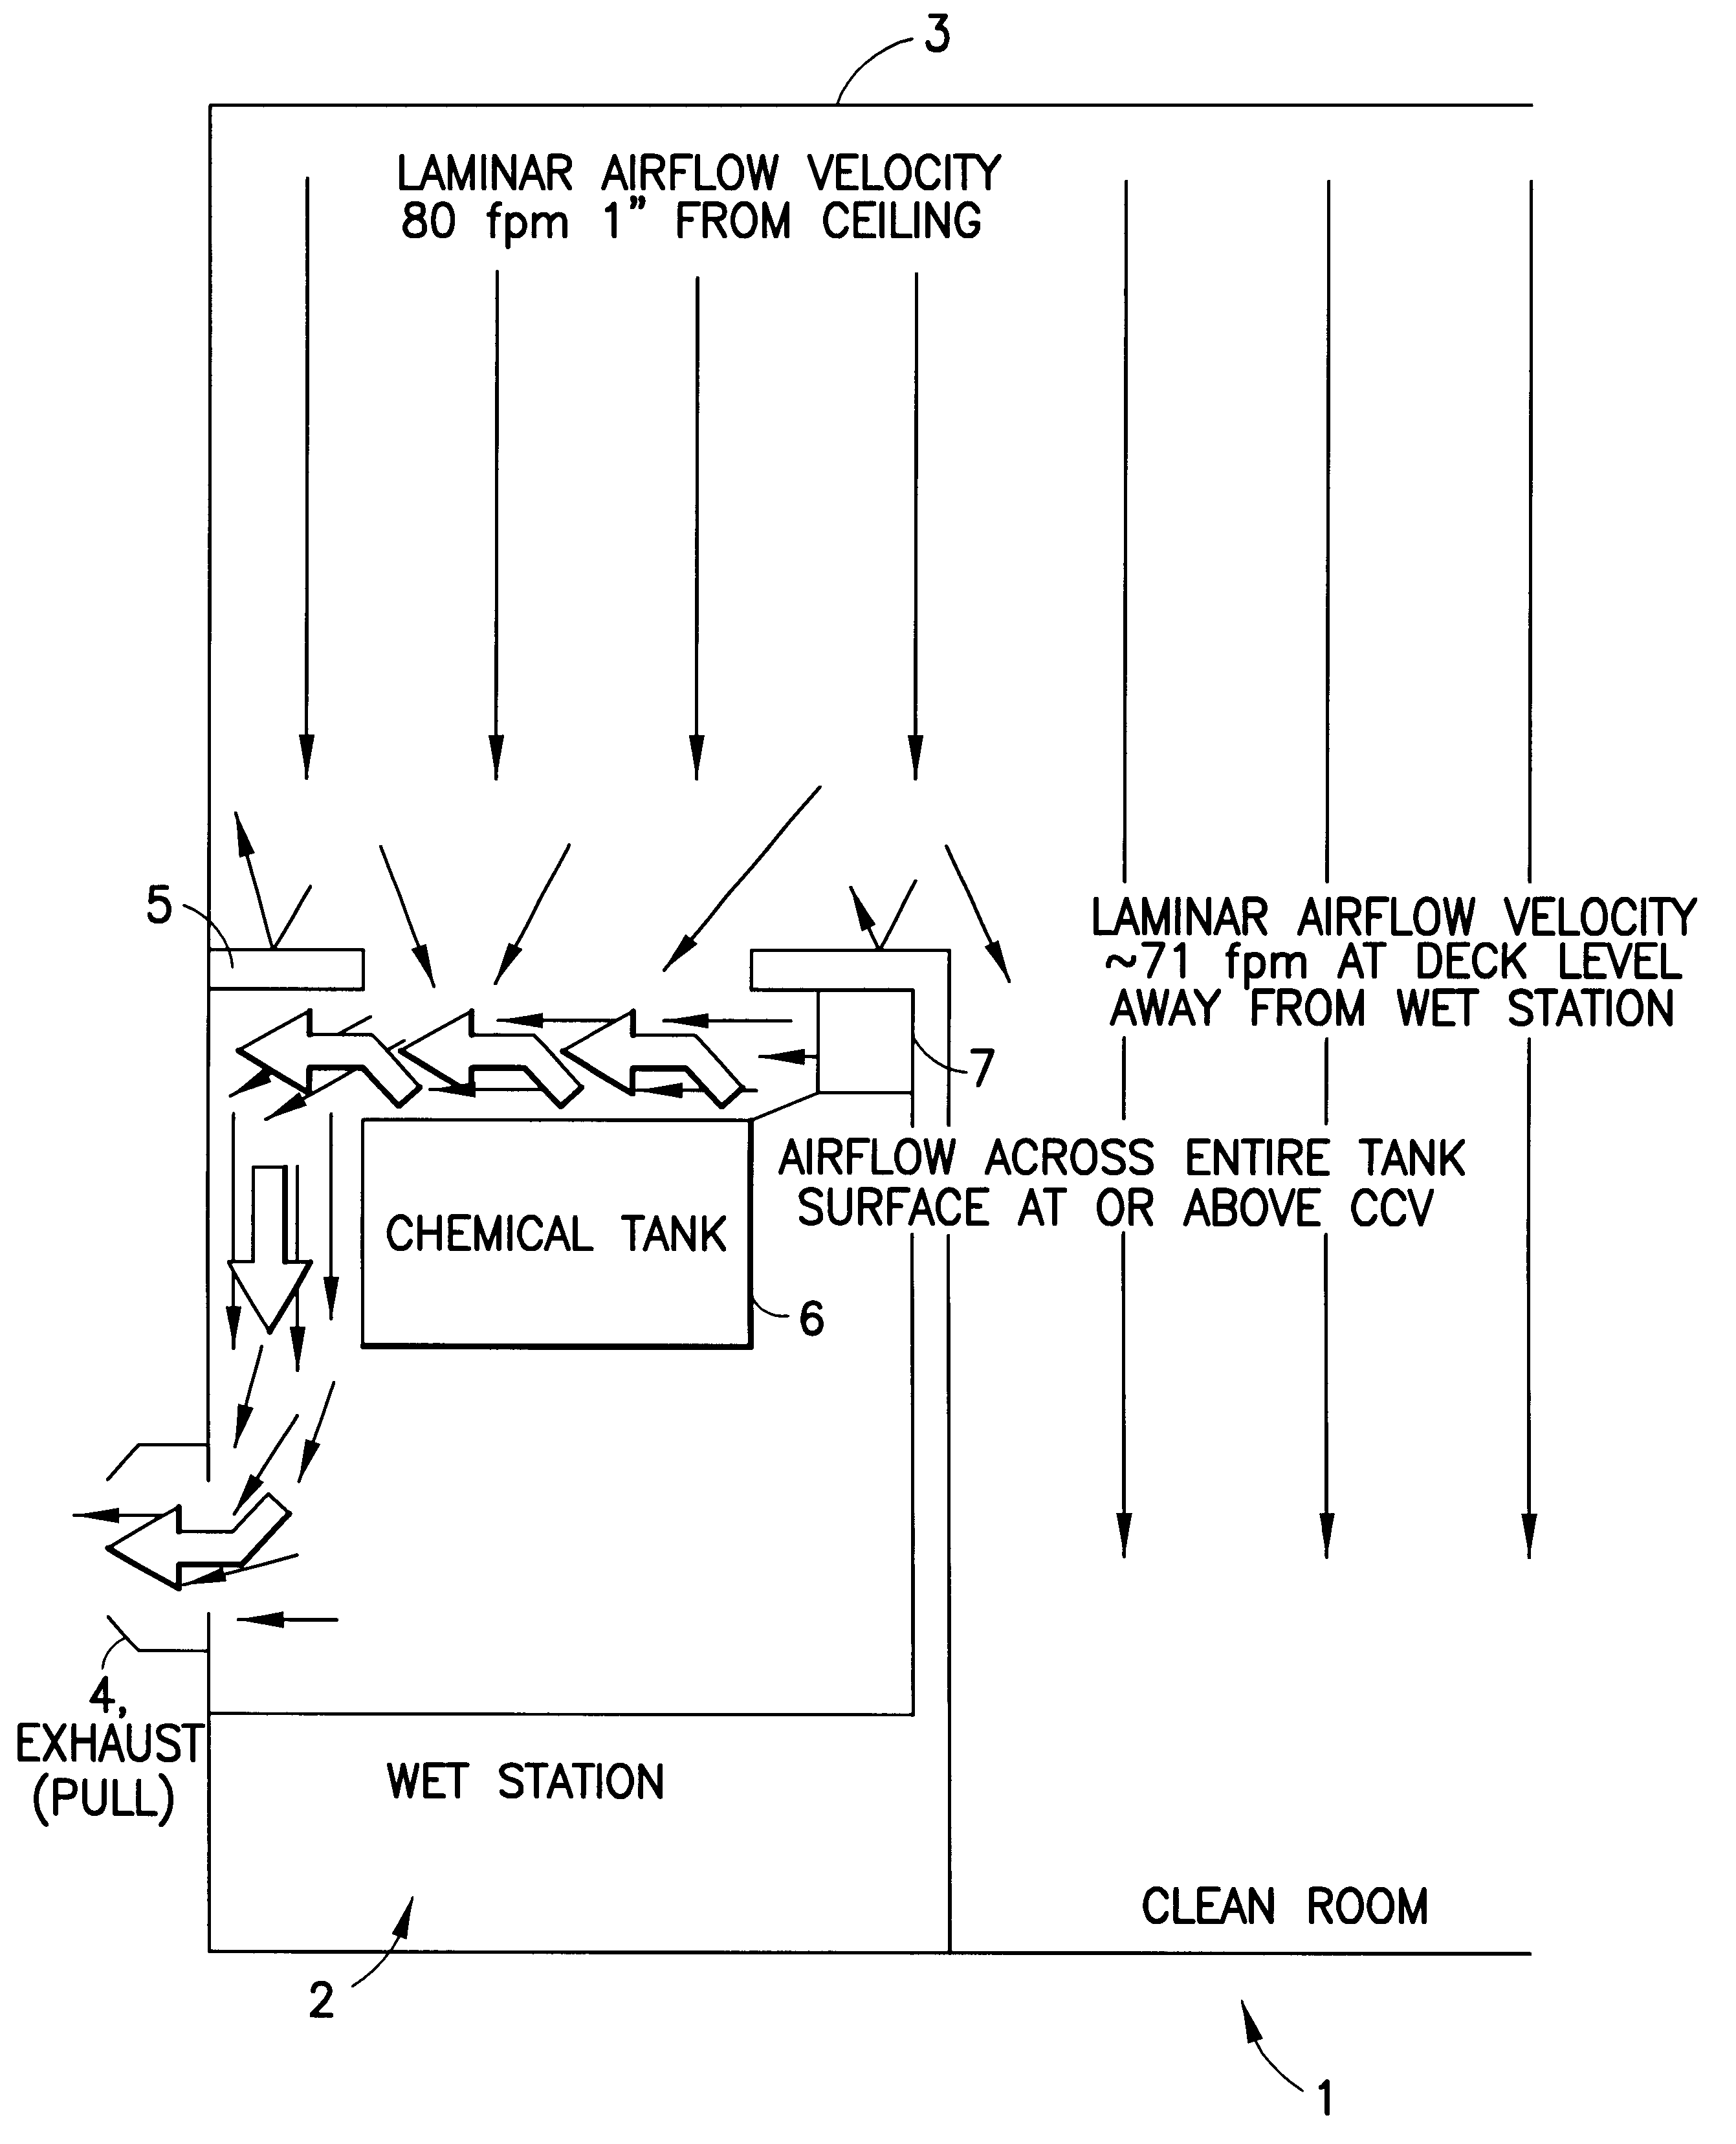 Air manager apparatus and method for exhausted equipment and systems, and exhaust and airflow management in a semiconductor manufacturing facility